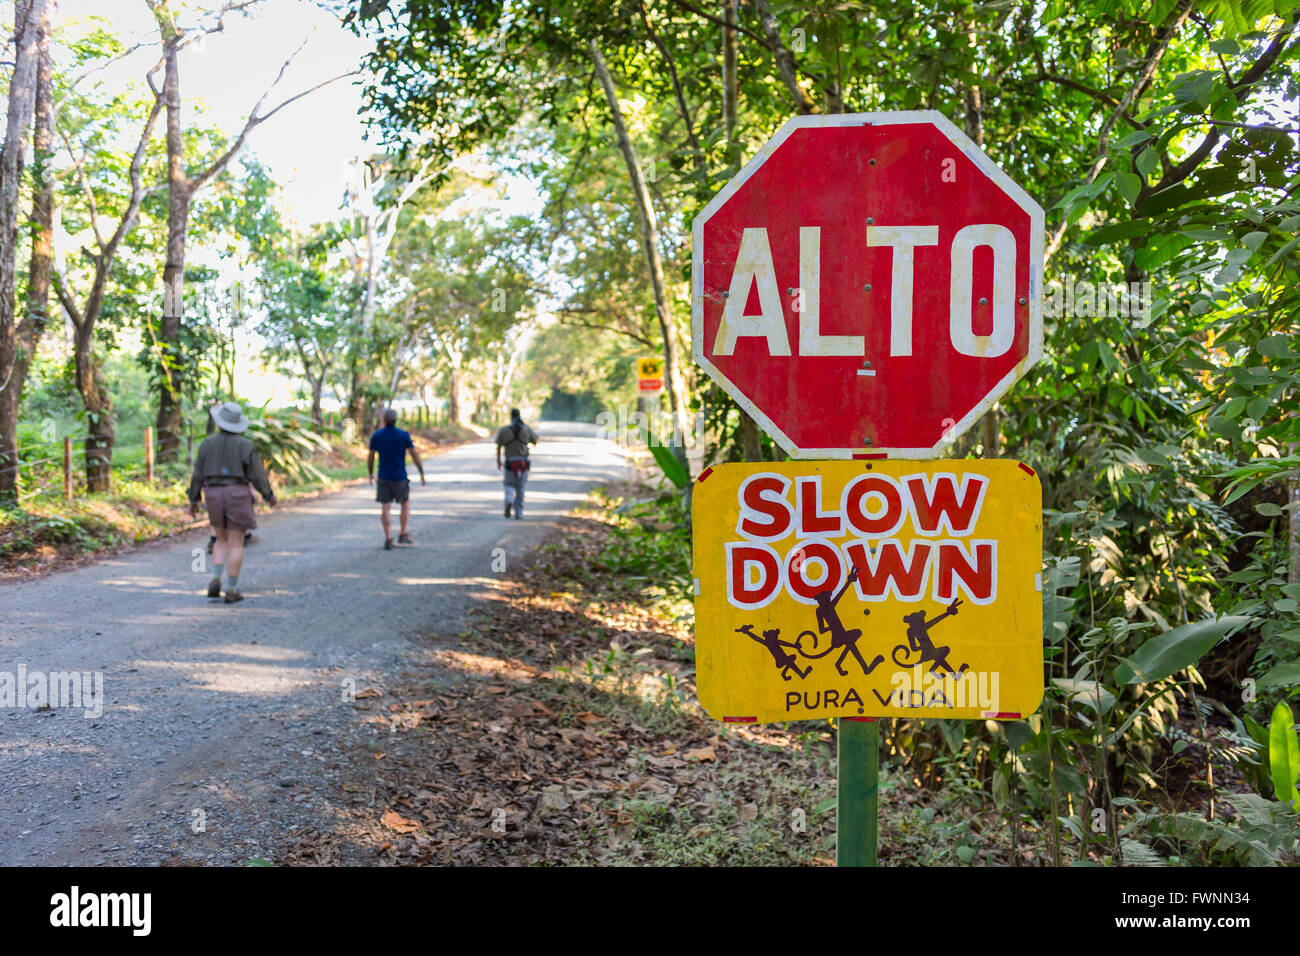 OSA PENINSULA, COSTA RICA - Stop sign, Alto and Slow Down on road with people walking. Stock Photo